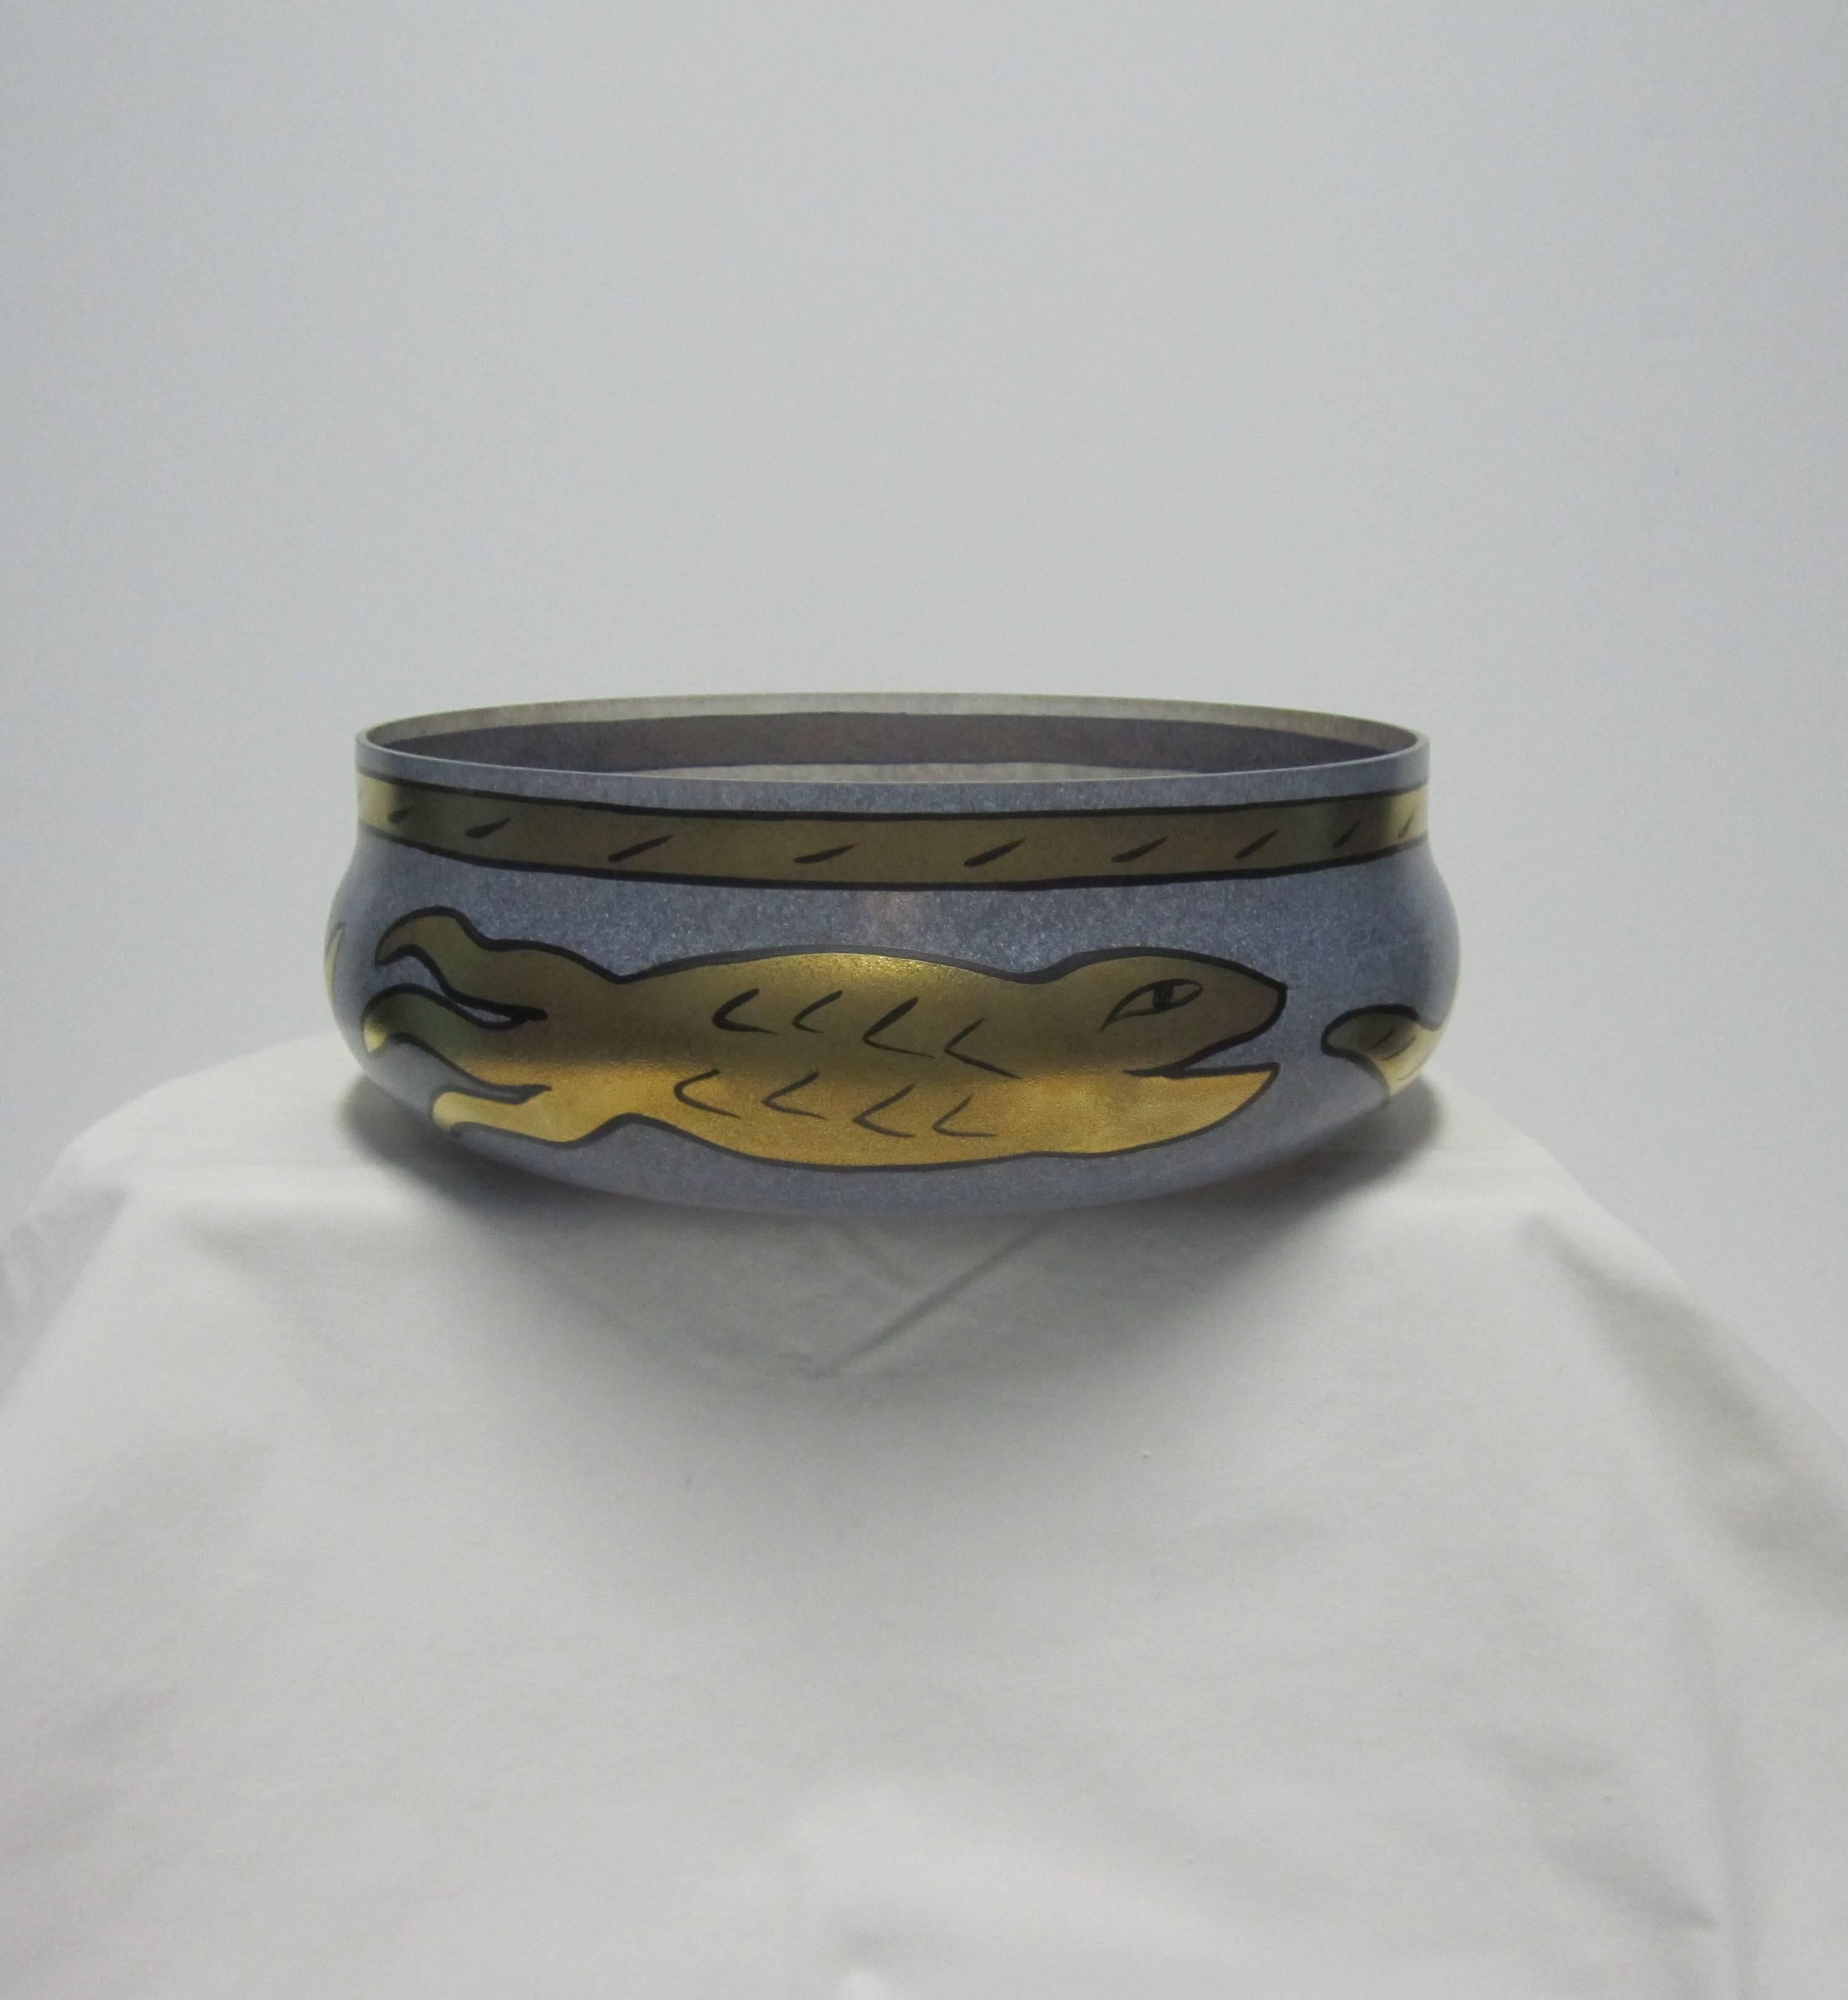 A beautiful glass centerpiece bowl in blue, black and gold, with serpent snake or fish design, hand-painted and signed by artist Ulrica Hydman-Vallien for Kosta Boda. Made in Sweden, circa 1990s. Maker's mark see image #7, and artist signature see